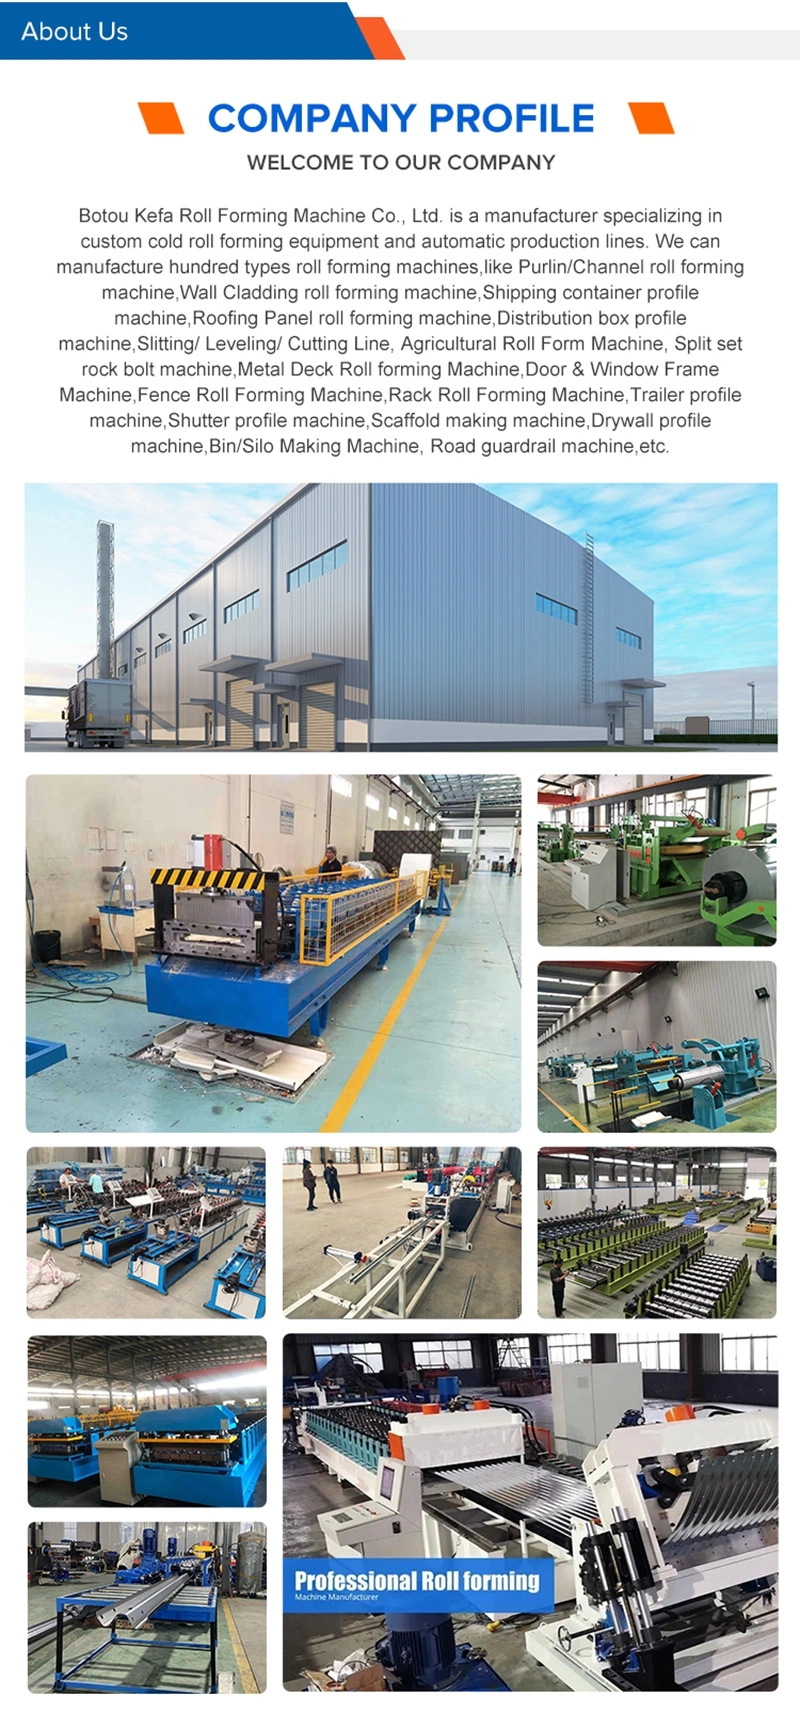 Helix Forming Machine Manufacturing of Screw Feeders and Conveyors, Auger Flights